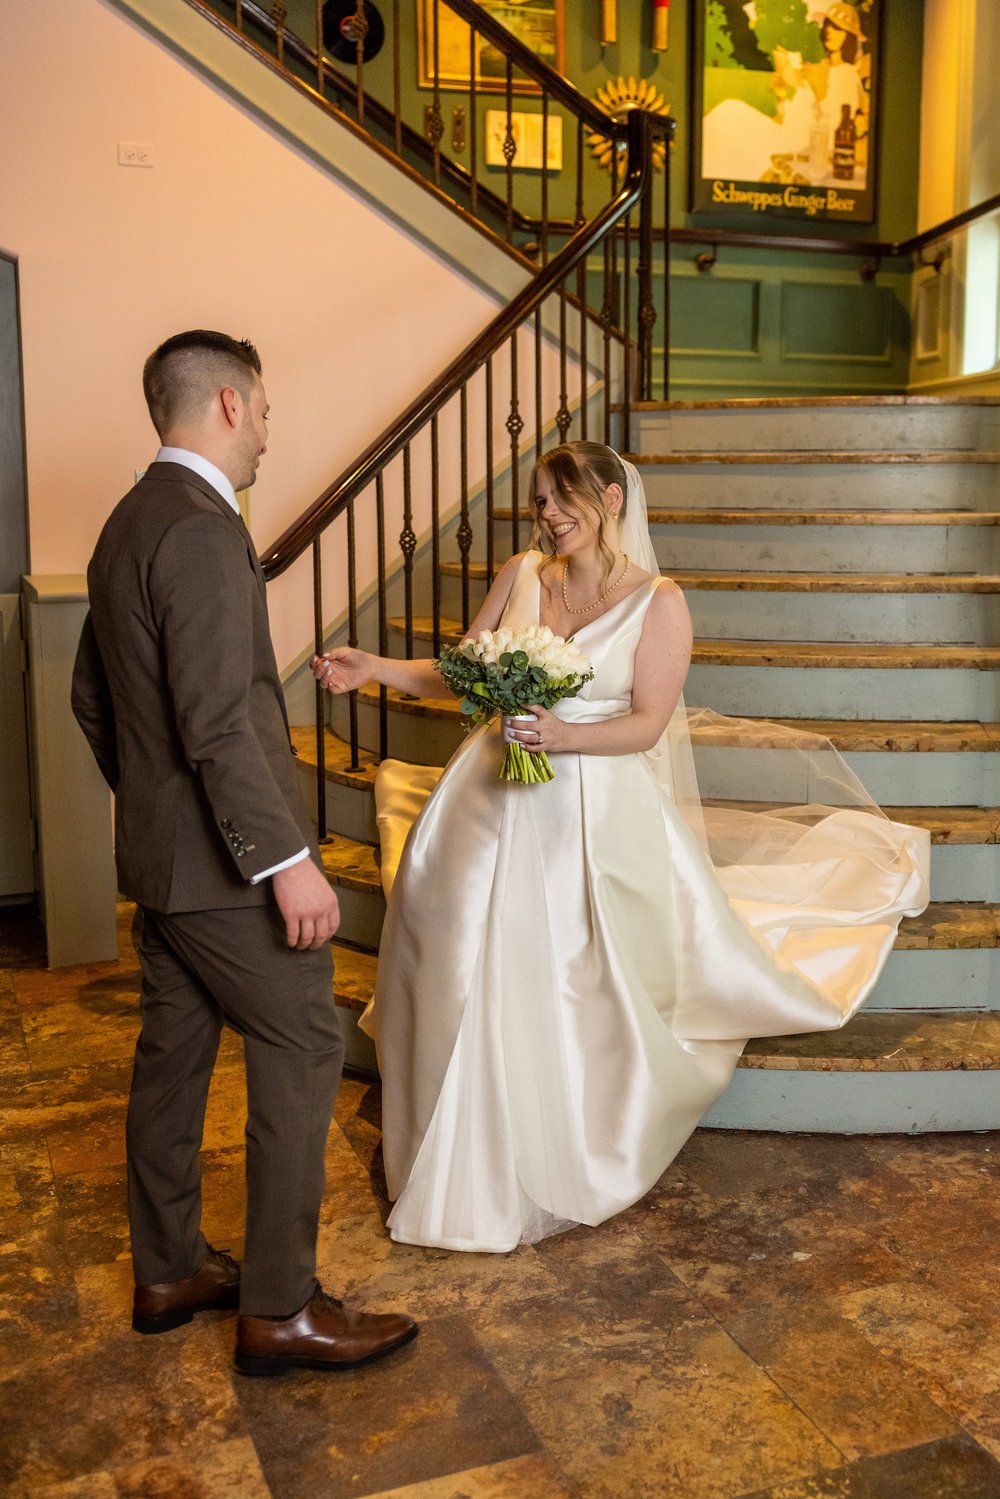 Alex Maldonado Photography | Chicago Wedding and lifestyle Photographer | wedding photos selina hotel bride and groom first look at stair case